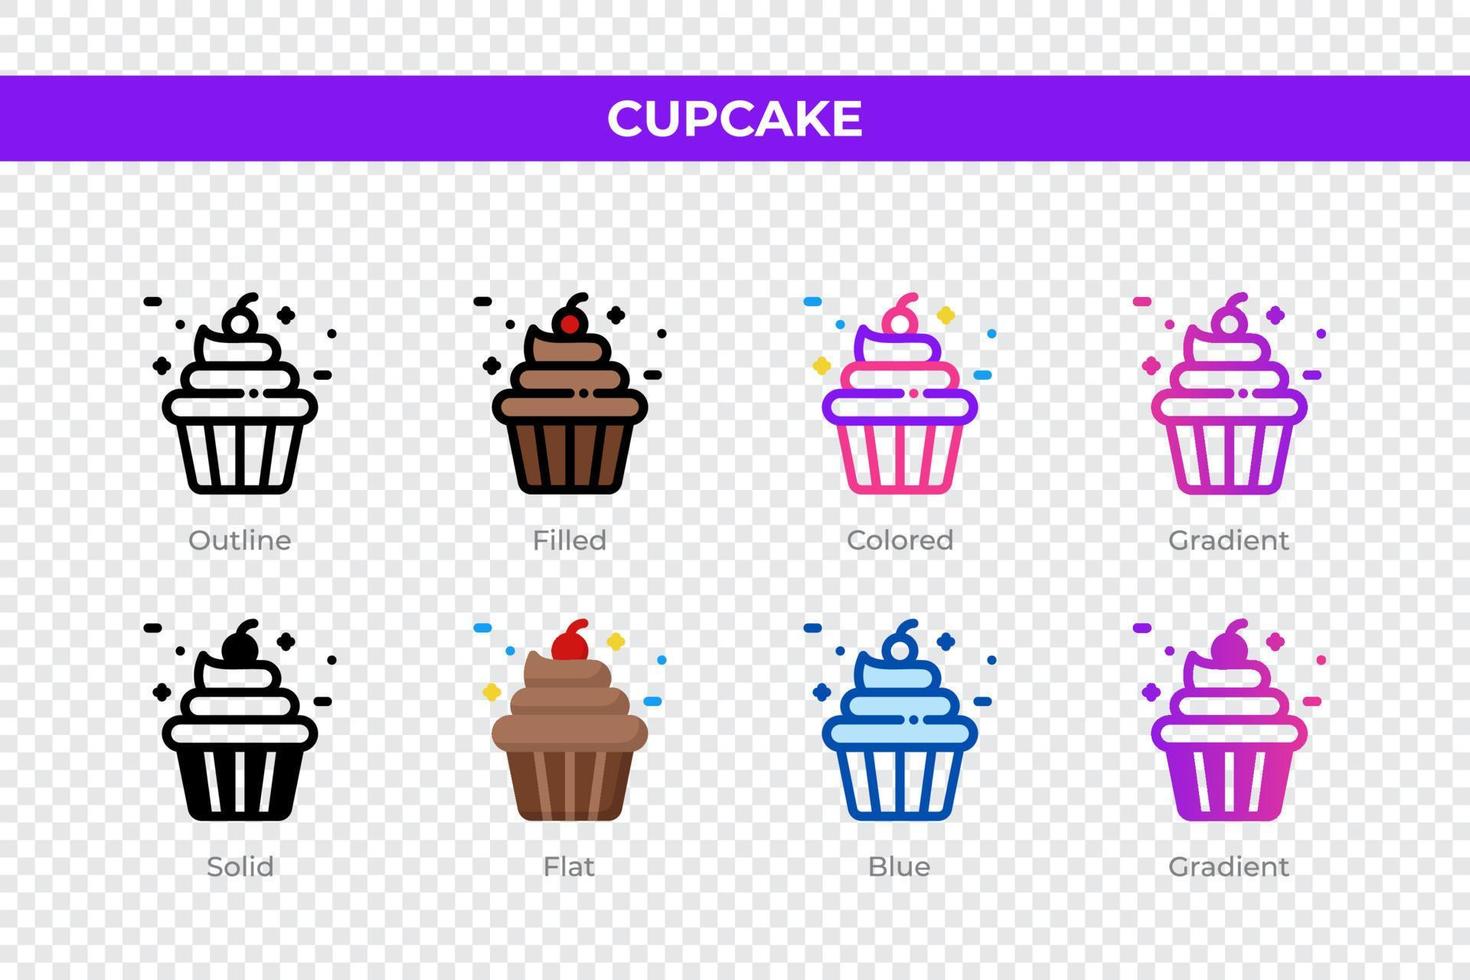 Cupcake icons in different style. Cupcake icons set. Holiday symbol. Different style icons set. Vector illustration